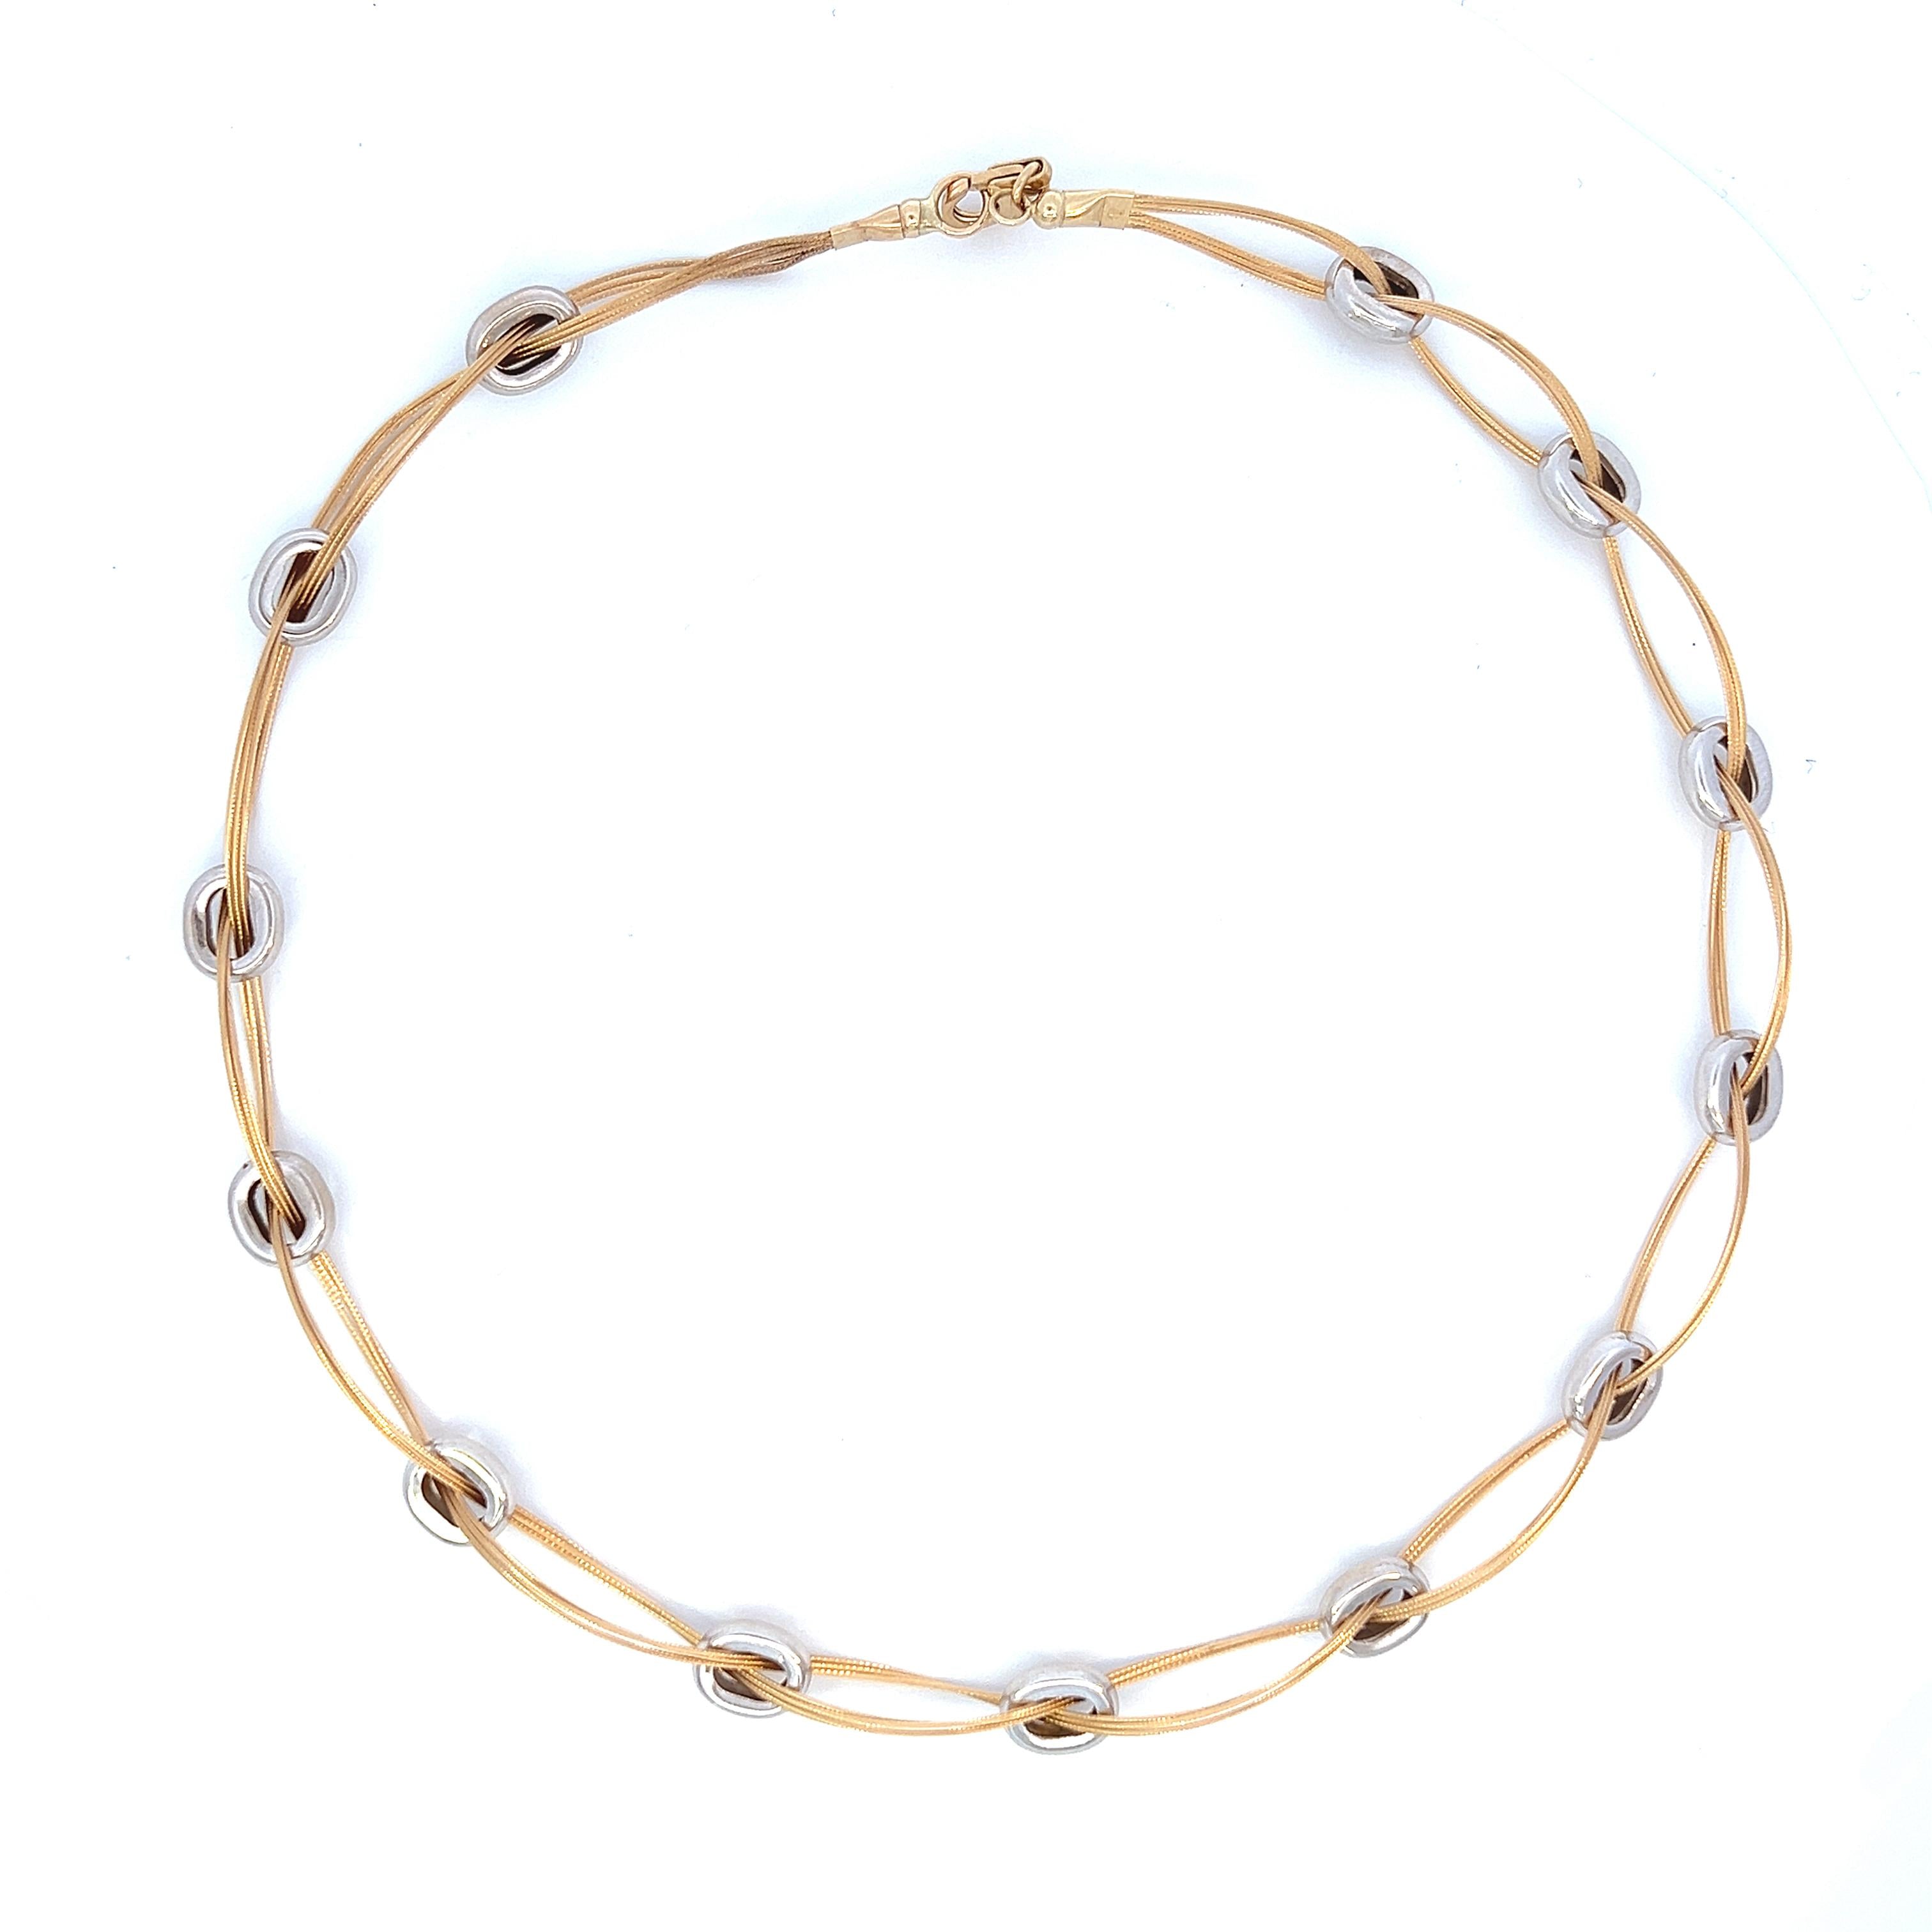 Vintage 14k White and Yellow Gold Choker Necklace